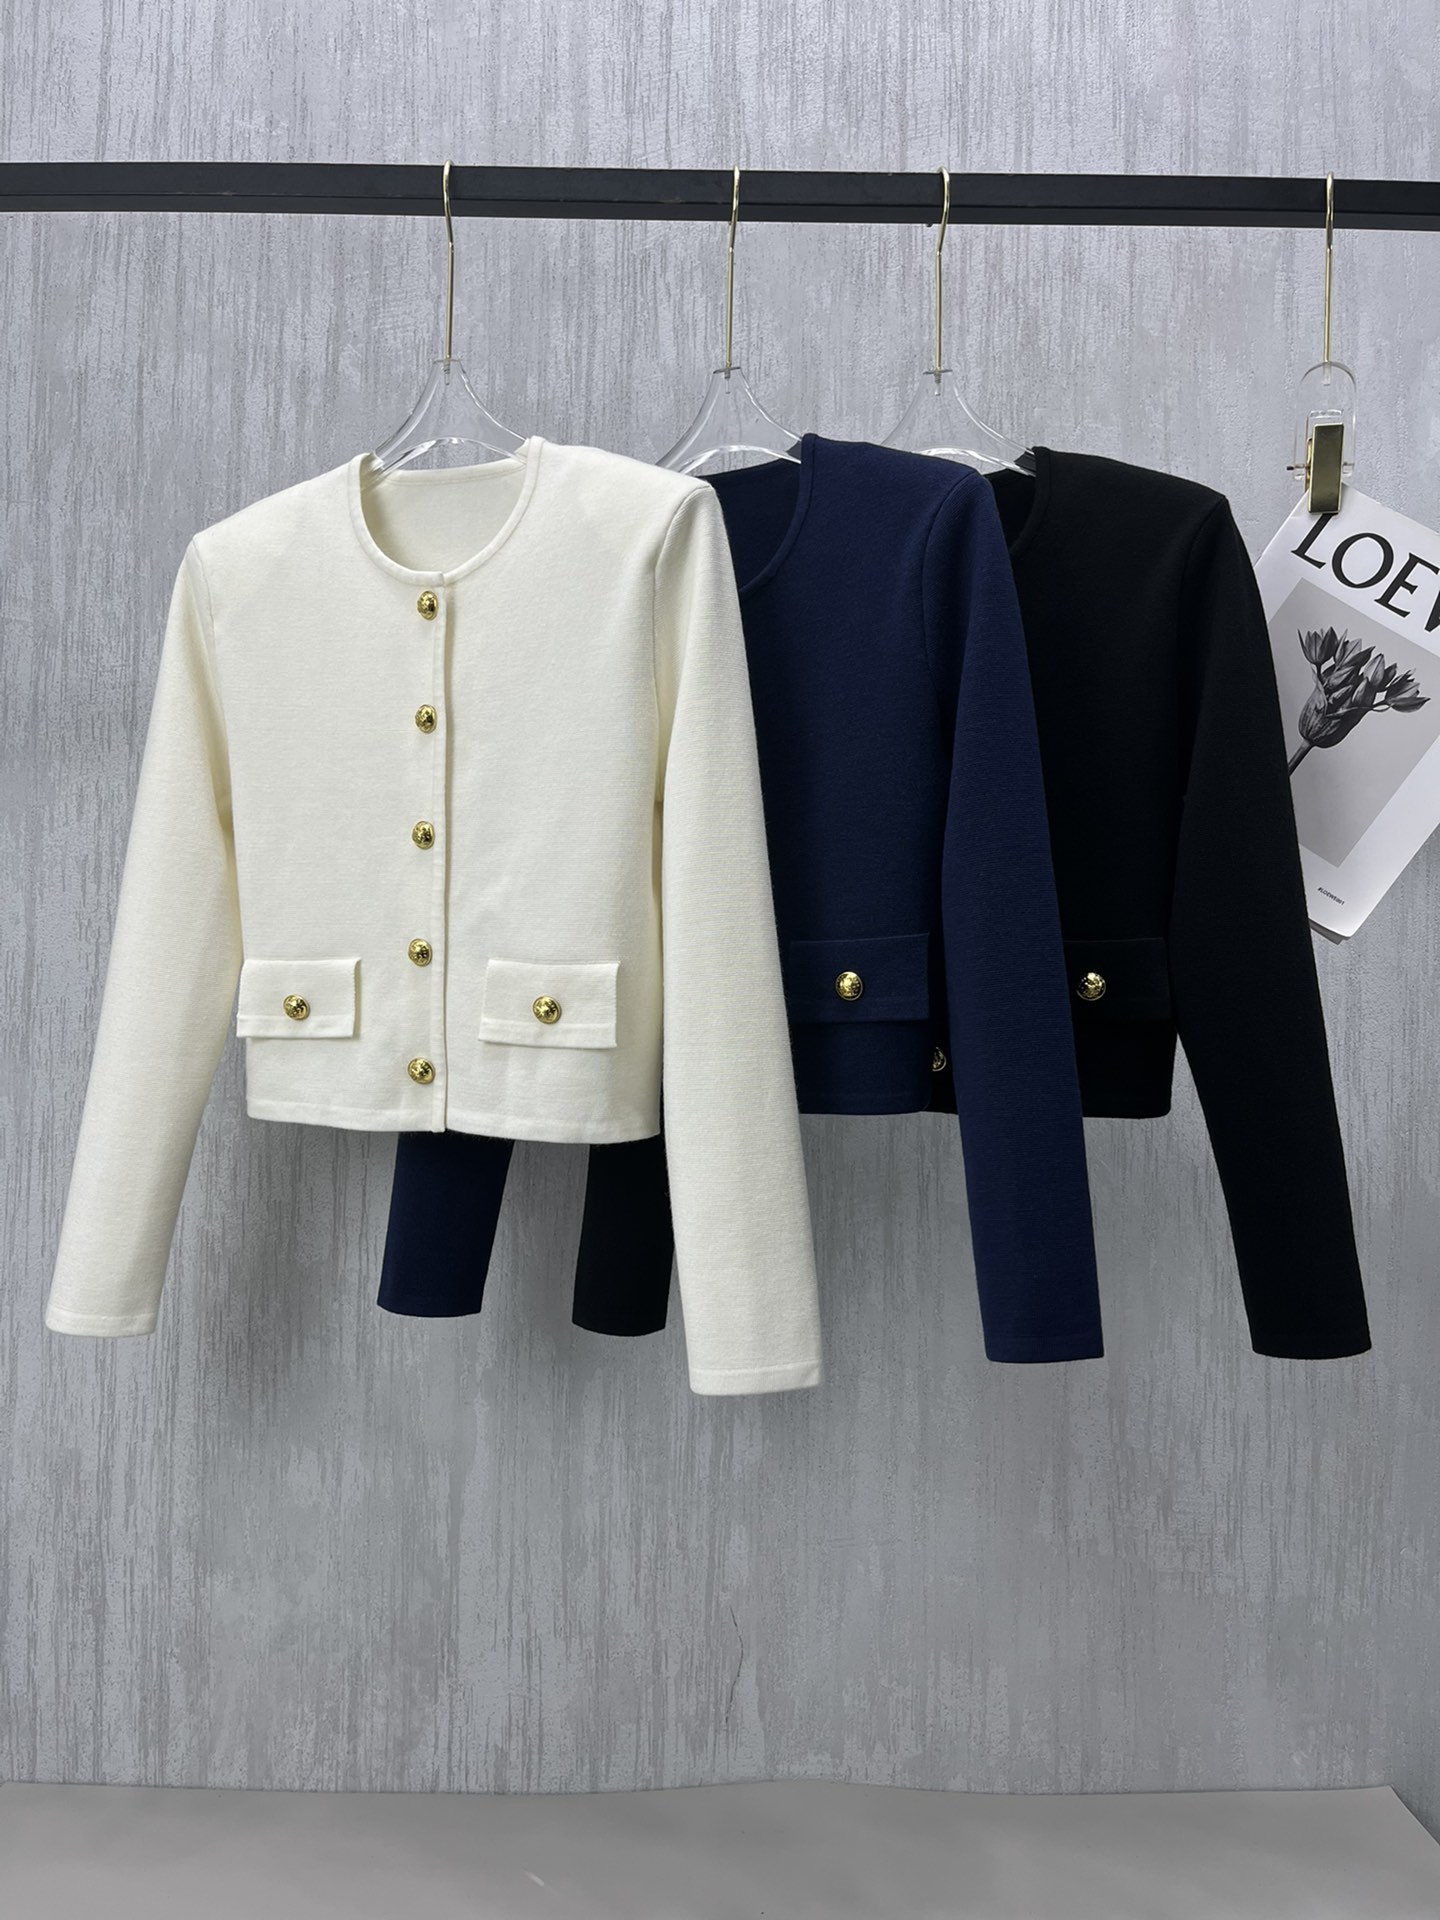 Celine Clothing Coats & Jackets Gold Hardware Wool Fall/Winter Collection Fashion